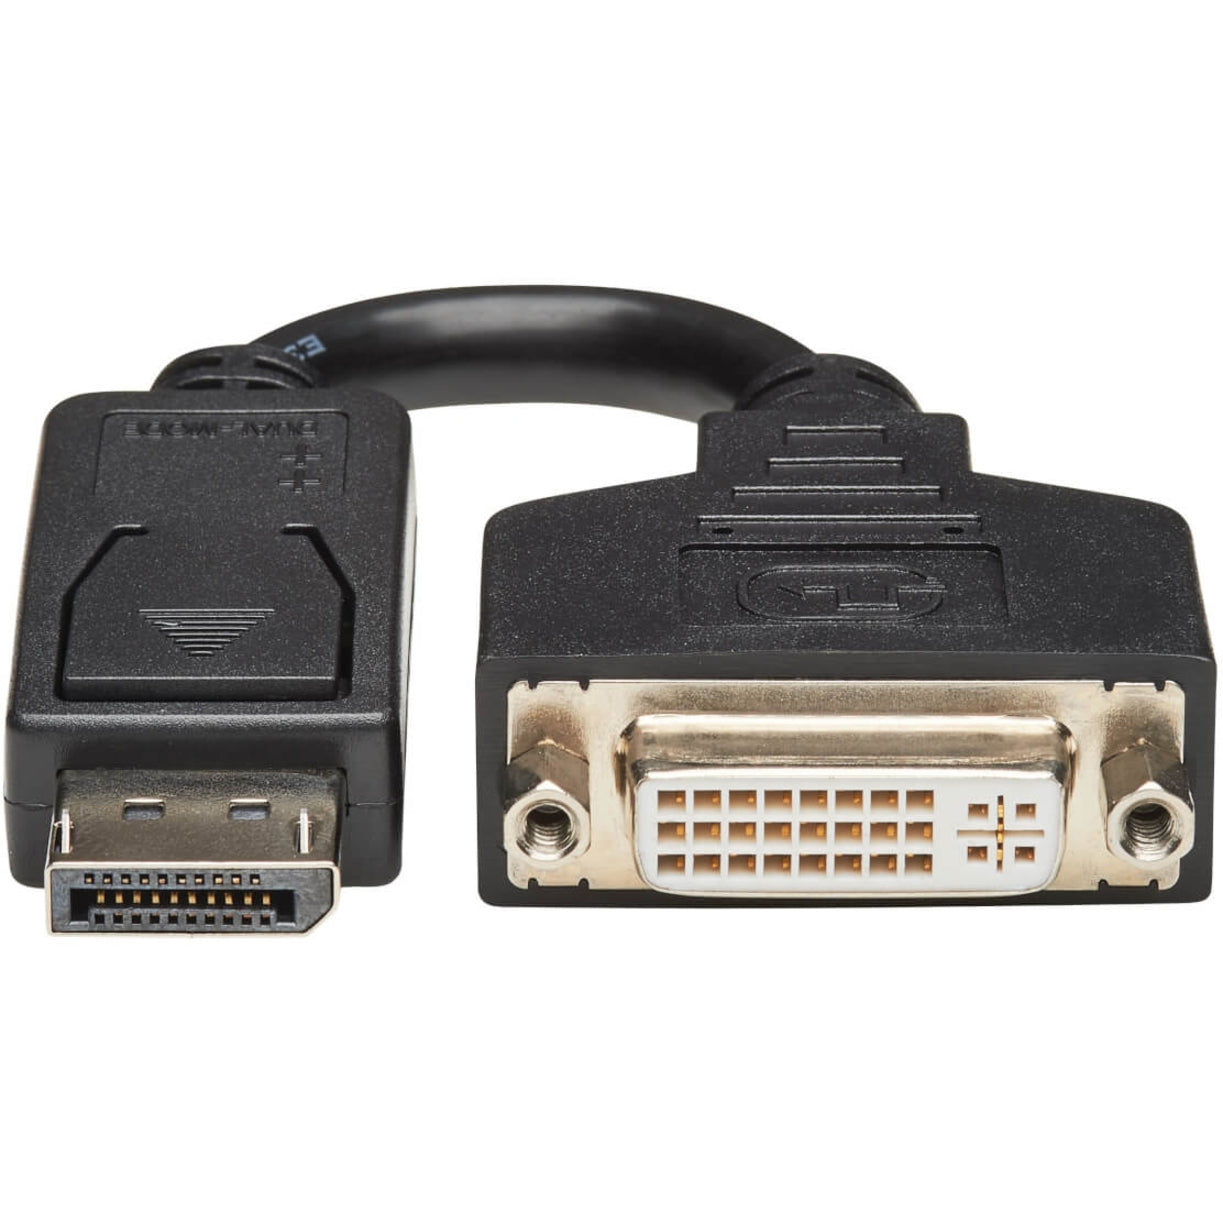 Tripp Lite P134-000 DisplayPort to DVI Cable Adapter, Black - Connect Your DisplayPort Device to a DVI Monitor